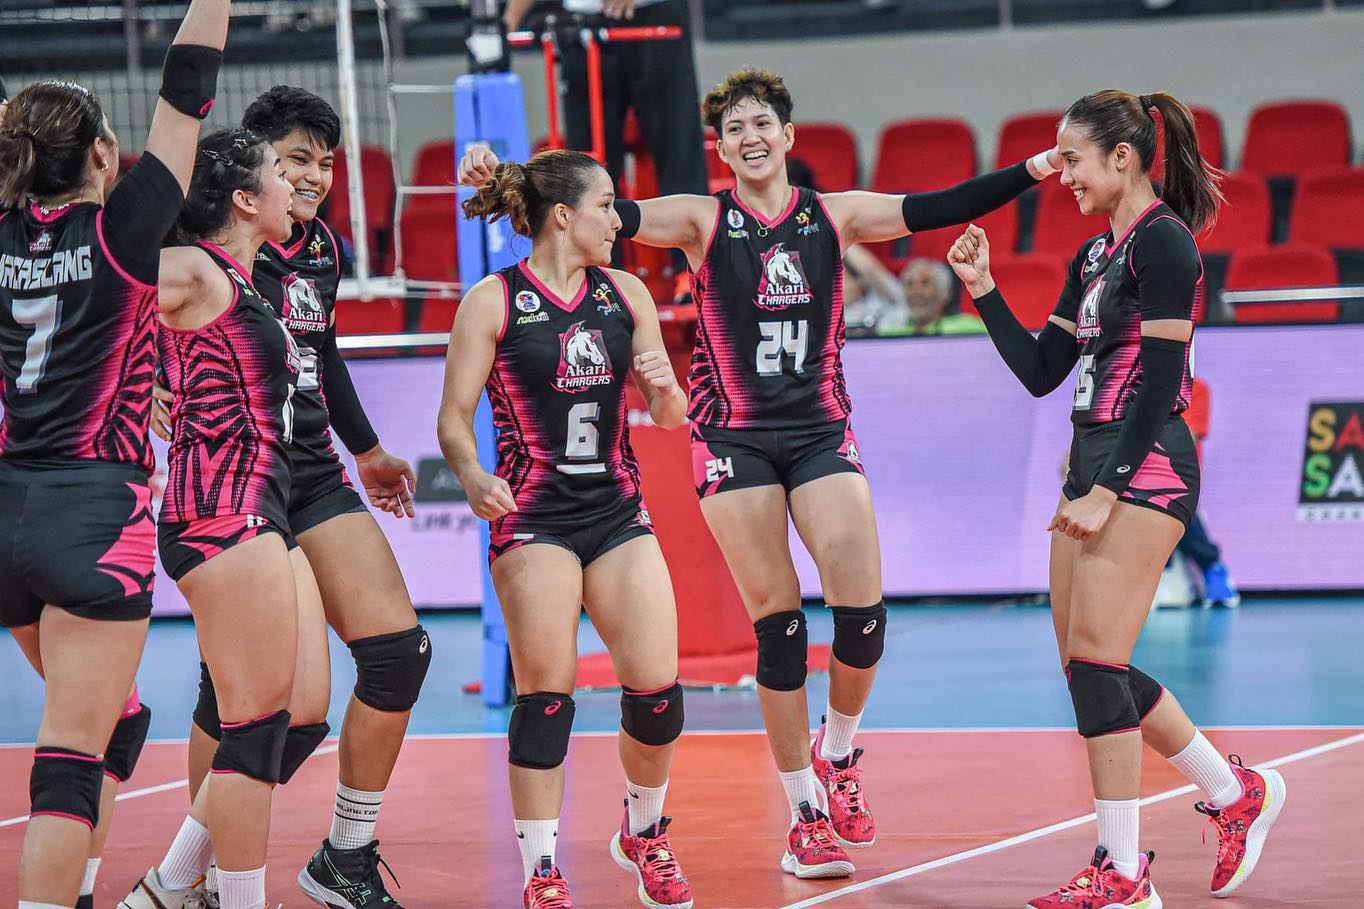 Akari Power Chargers in the Premier Volleyball League